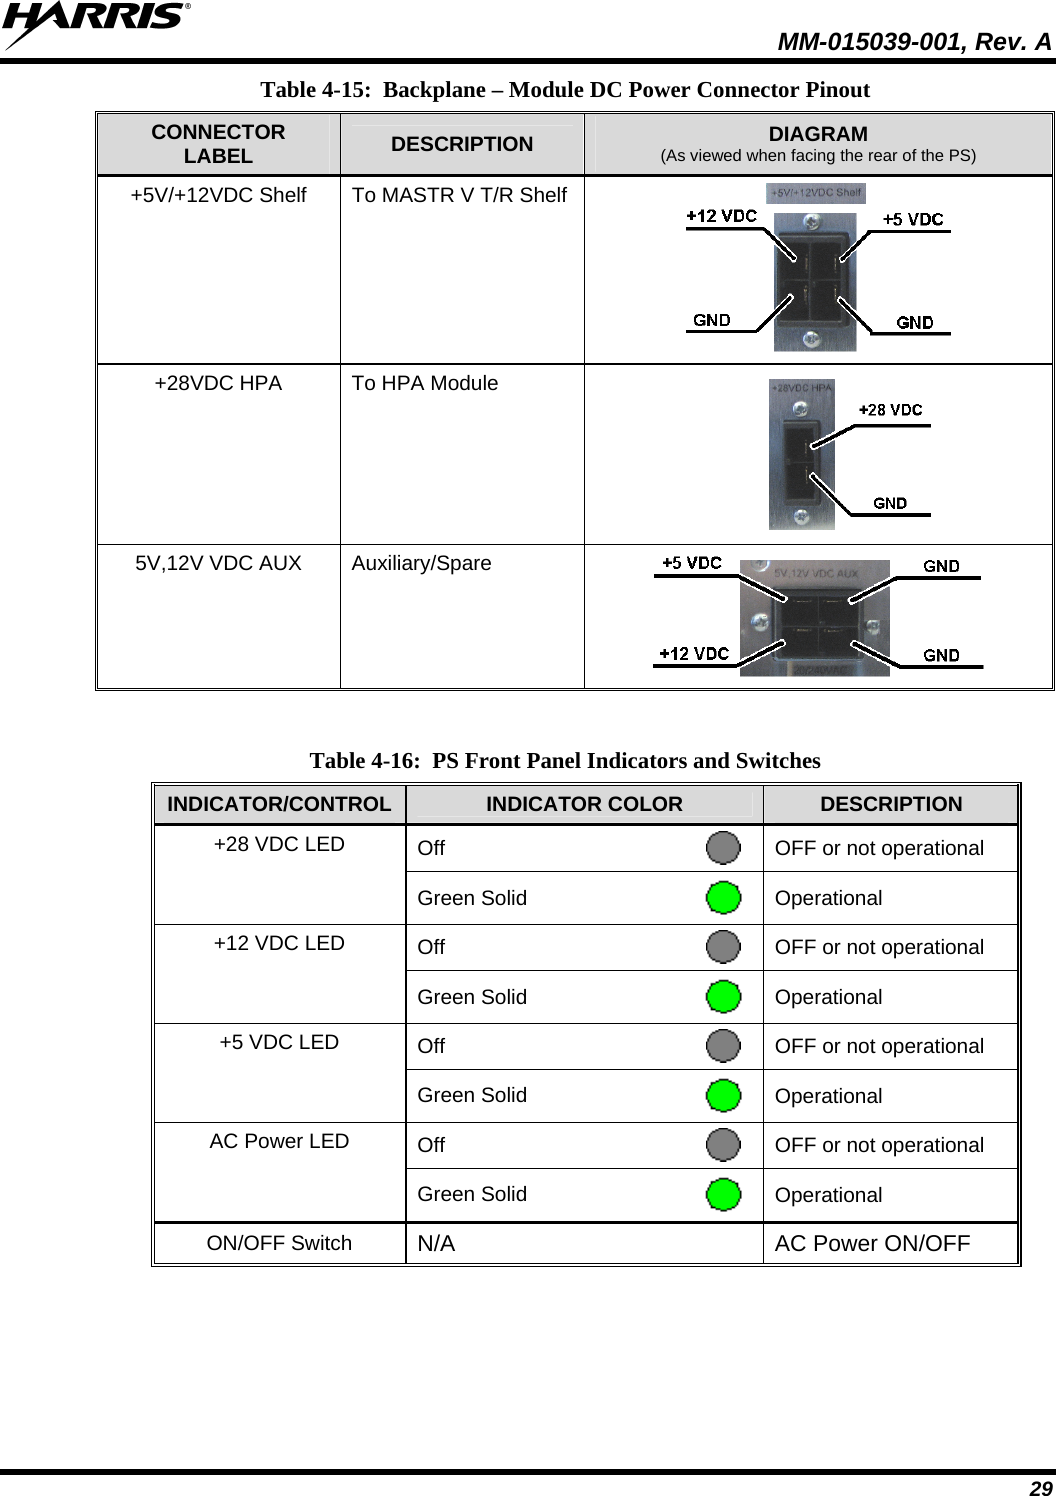   MM-015039-001, Rev. A 29 Table 4-15:  Backplane – Module DC Power Connector Pinout CONNECTOR LABEL  DESCRIPTION  DIAGRAM (As viewed when facing the rear of the PS) +5V/+12VDC Shelf  To MASTR V T/R Shelf  +28VDC HPA  To HPA Module                                5V,12V VDC AUX  Auxiliary/Spare    Table 4-16:  PS Front Panel Indicators and Switches INDICATOR/CONTROL  INDICATOR COLOR  DESCRIPTION Off   OFF or not operational +28 VDC LED Green Solid   Operational Off   OFF or not operational +12 VDC LED Green Solid   Operational Off   OFF or not operational +5 VDC LED Green Solid   Operational Off   OFF or not operational AC Power LED Green Solid   Operational ON/OFF Switch  N/A  AC Power ON/OFF  